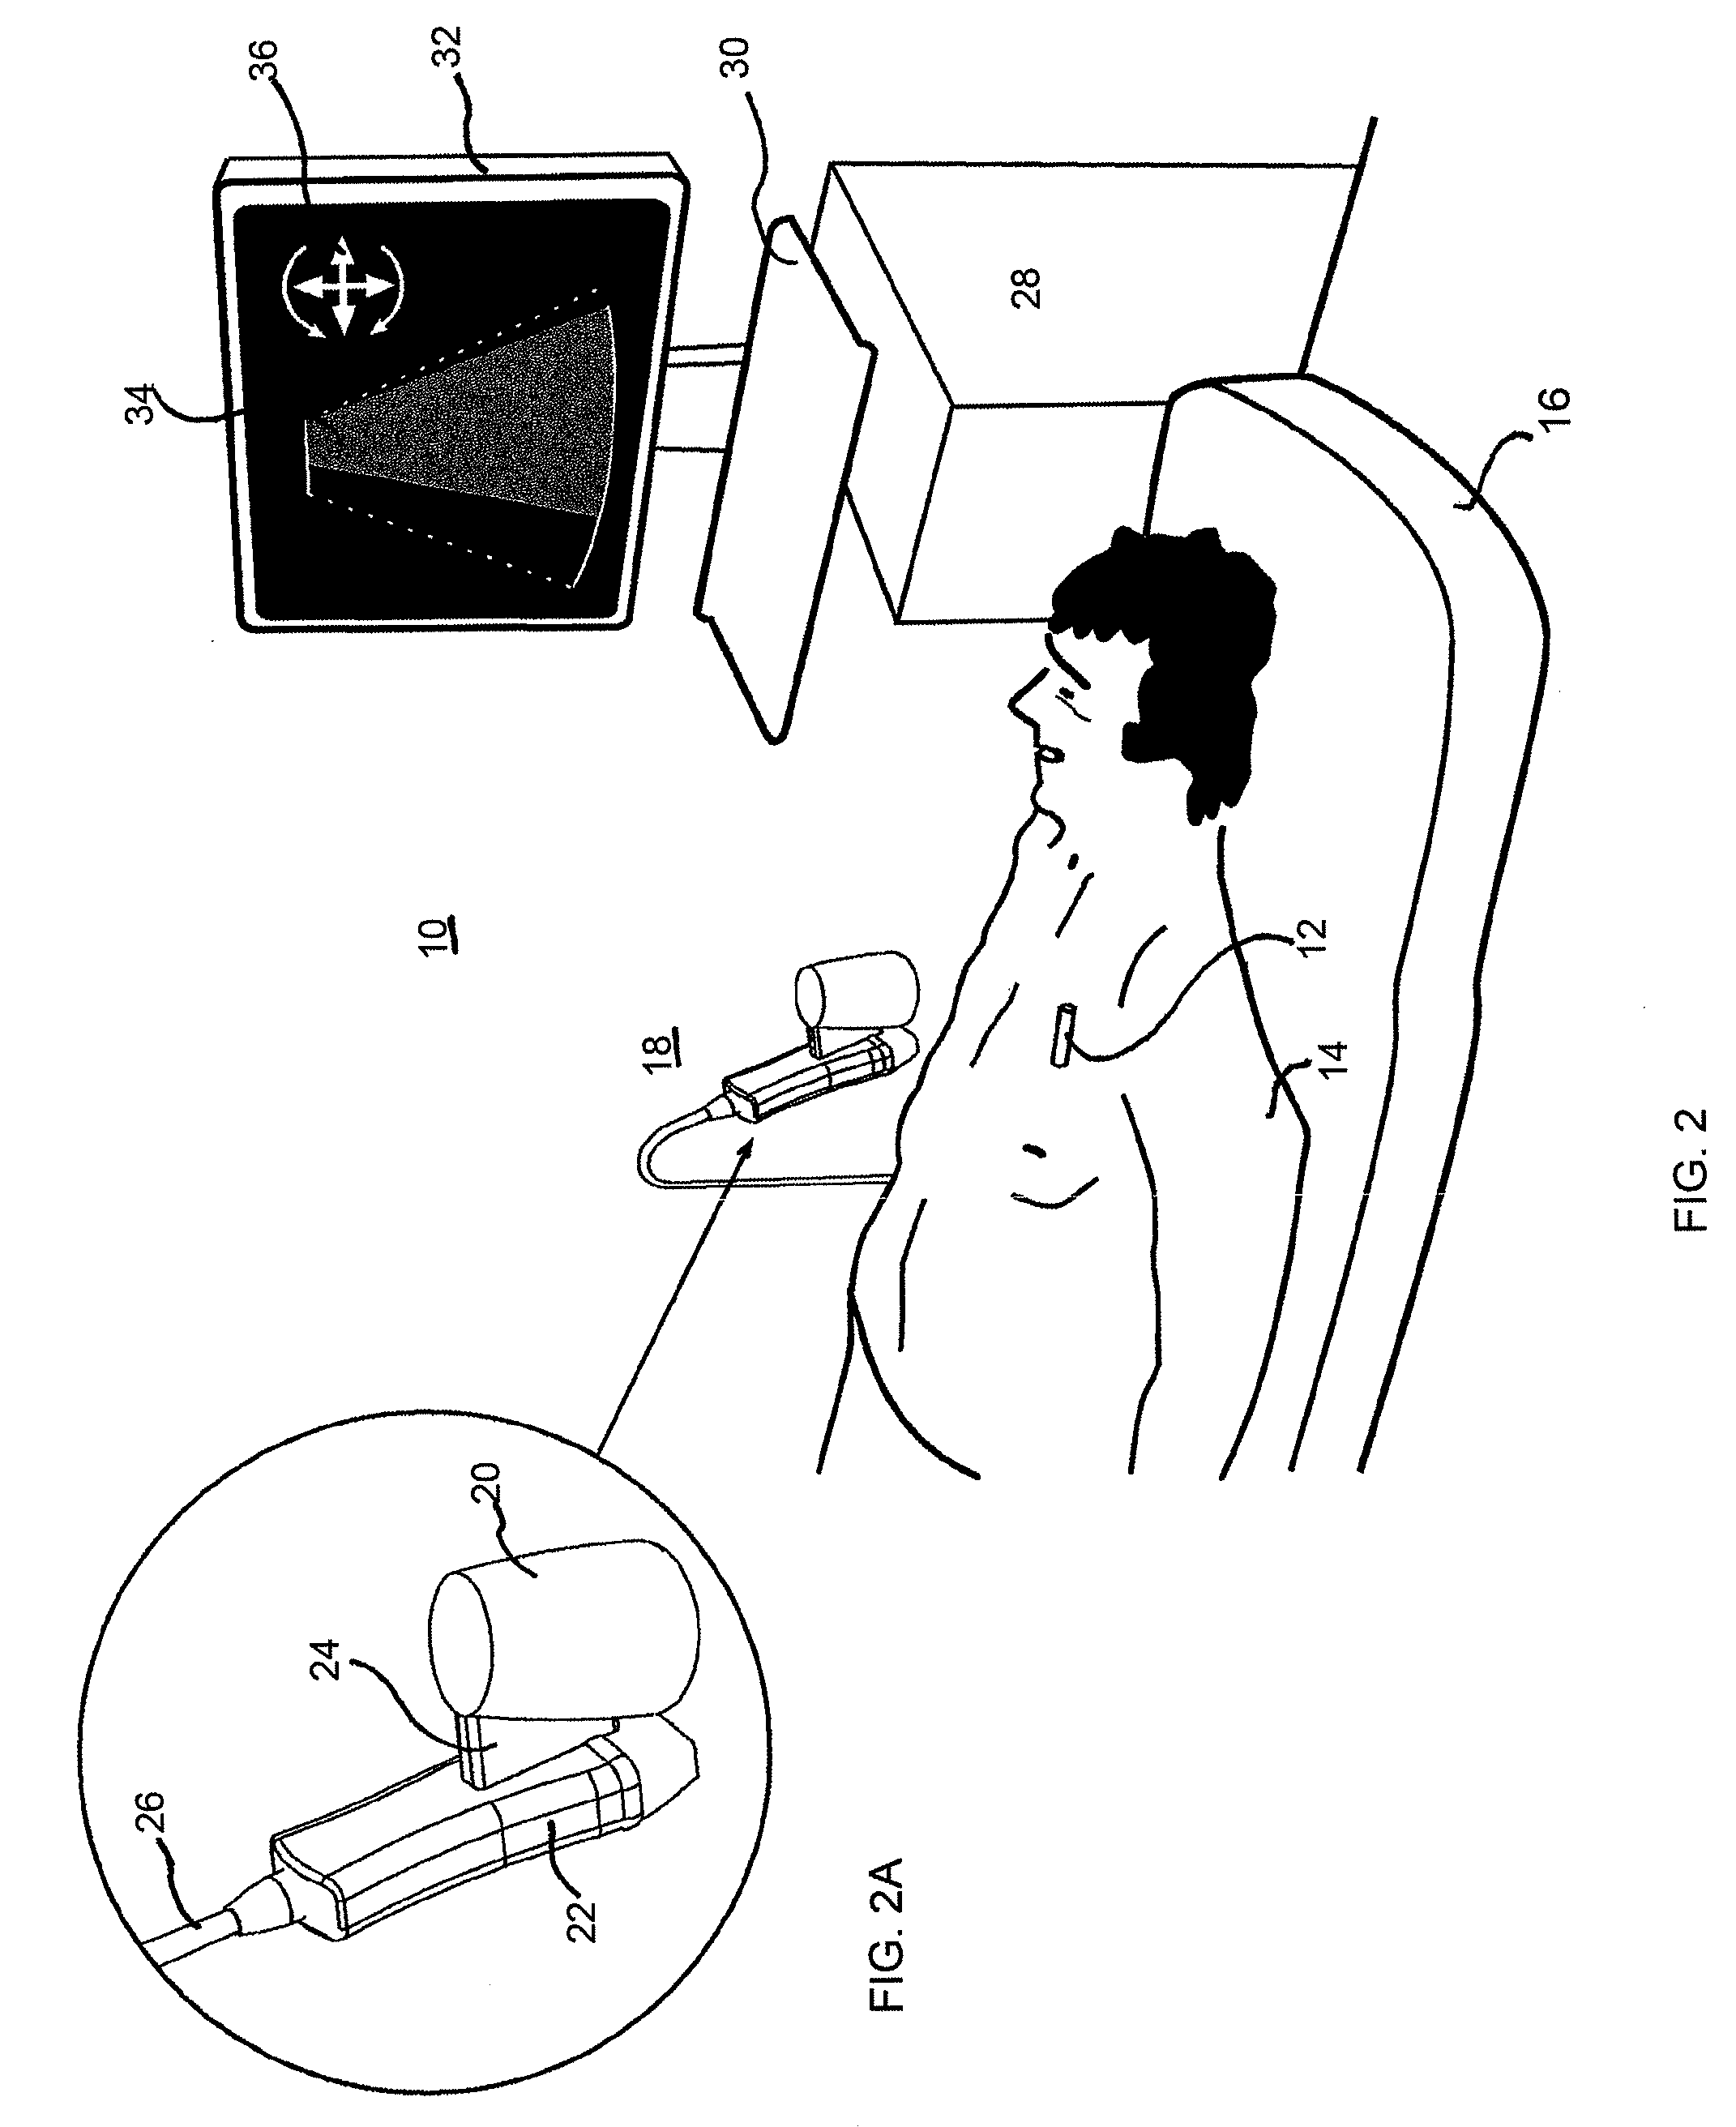 Location tracking of a metallic object in a living body using a radar detector and guiding an ultrasound probe to direct ultrasound waves at the location